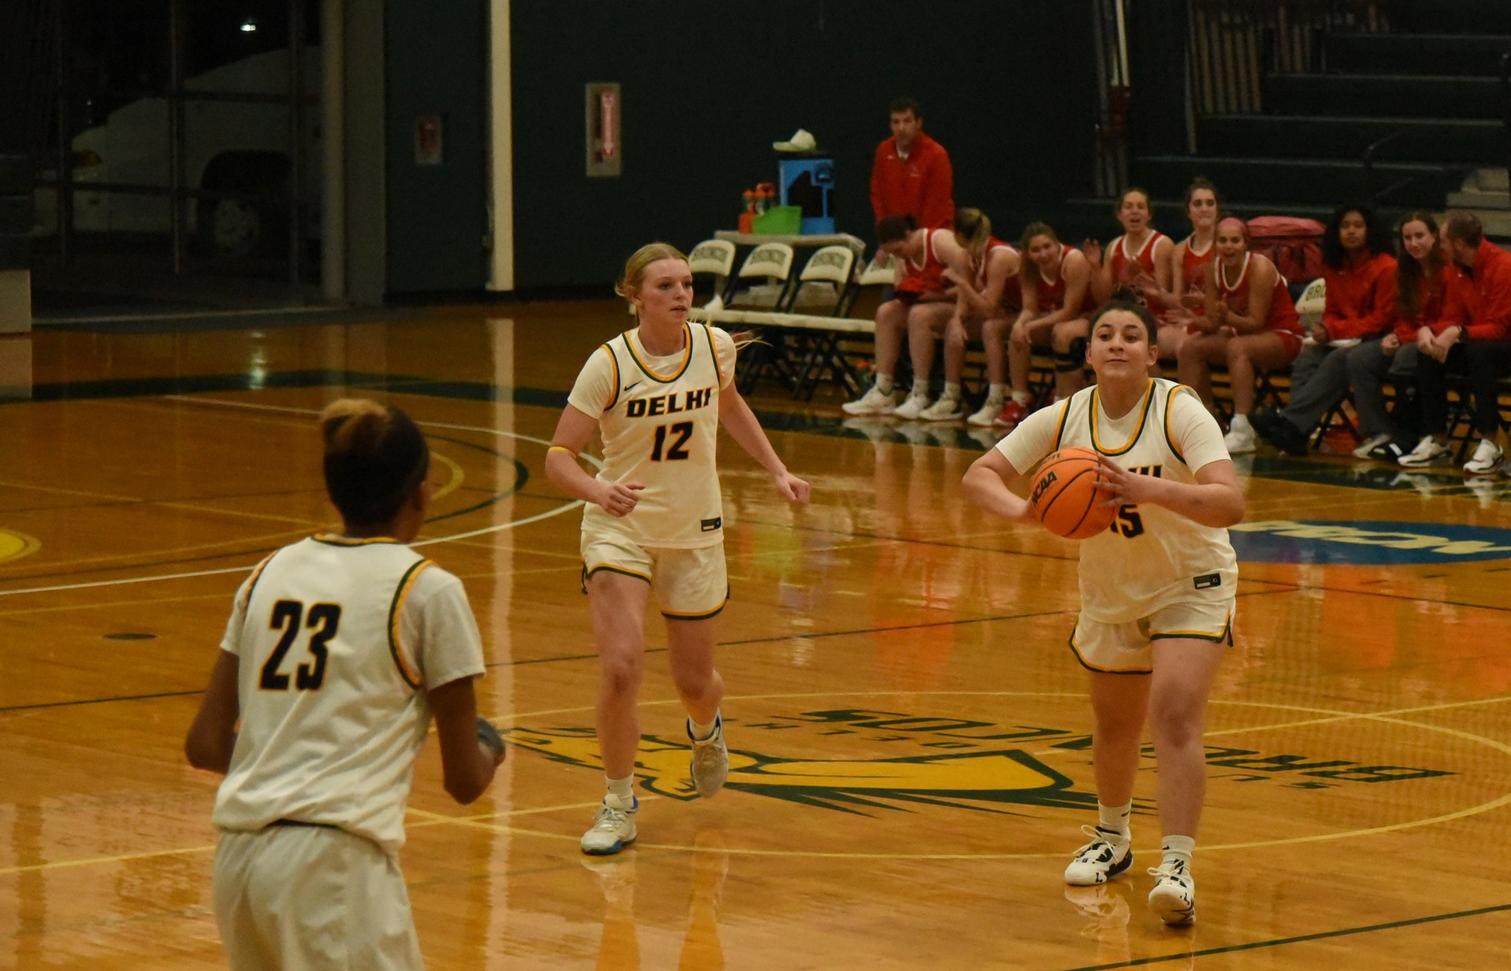 Delhi falls in an away game to Marywood University despite outscoring them in the paint